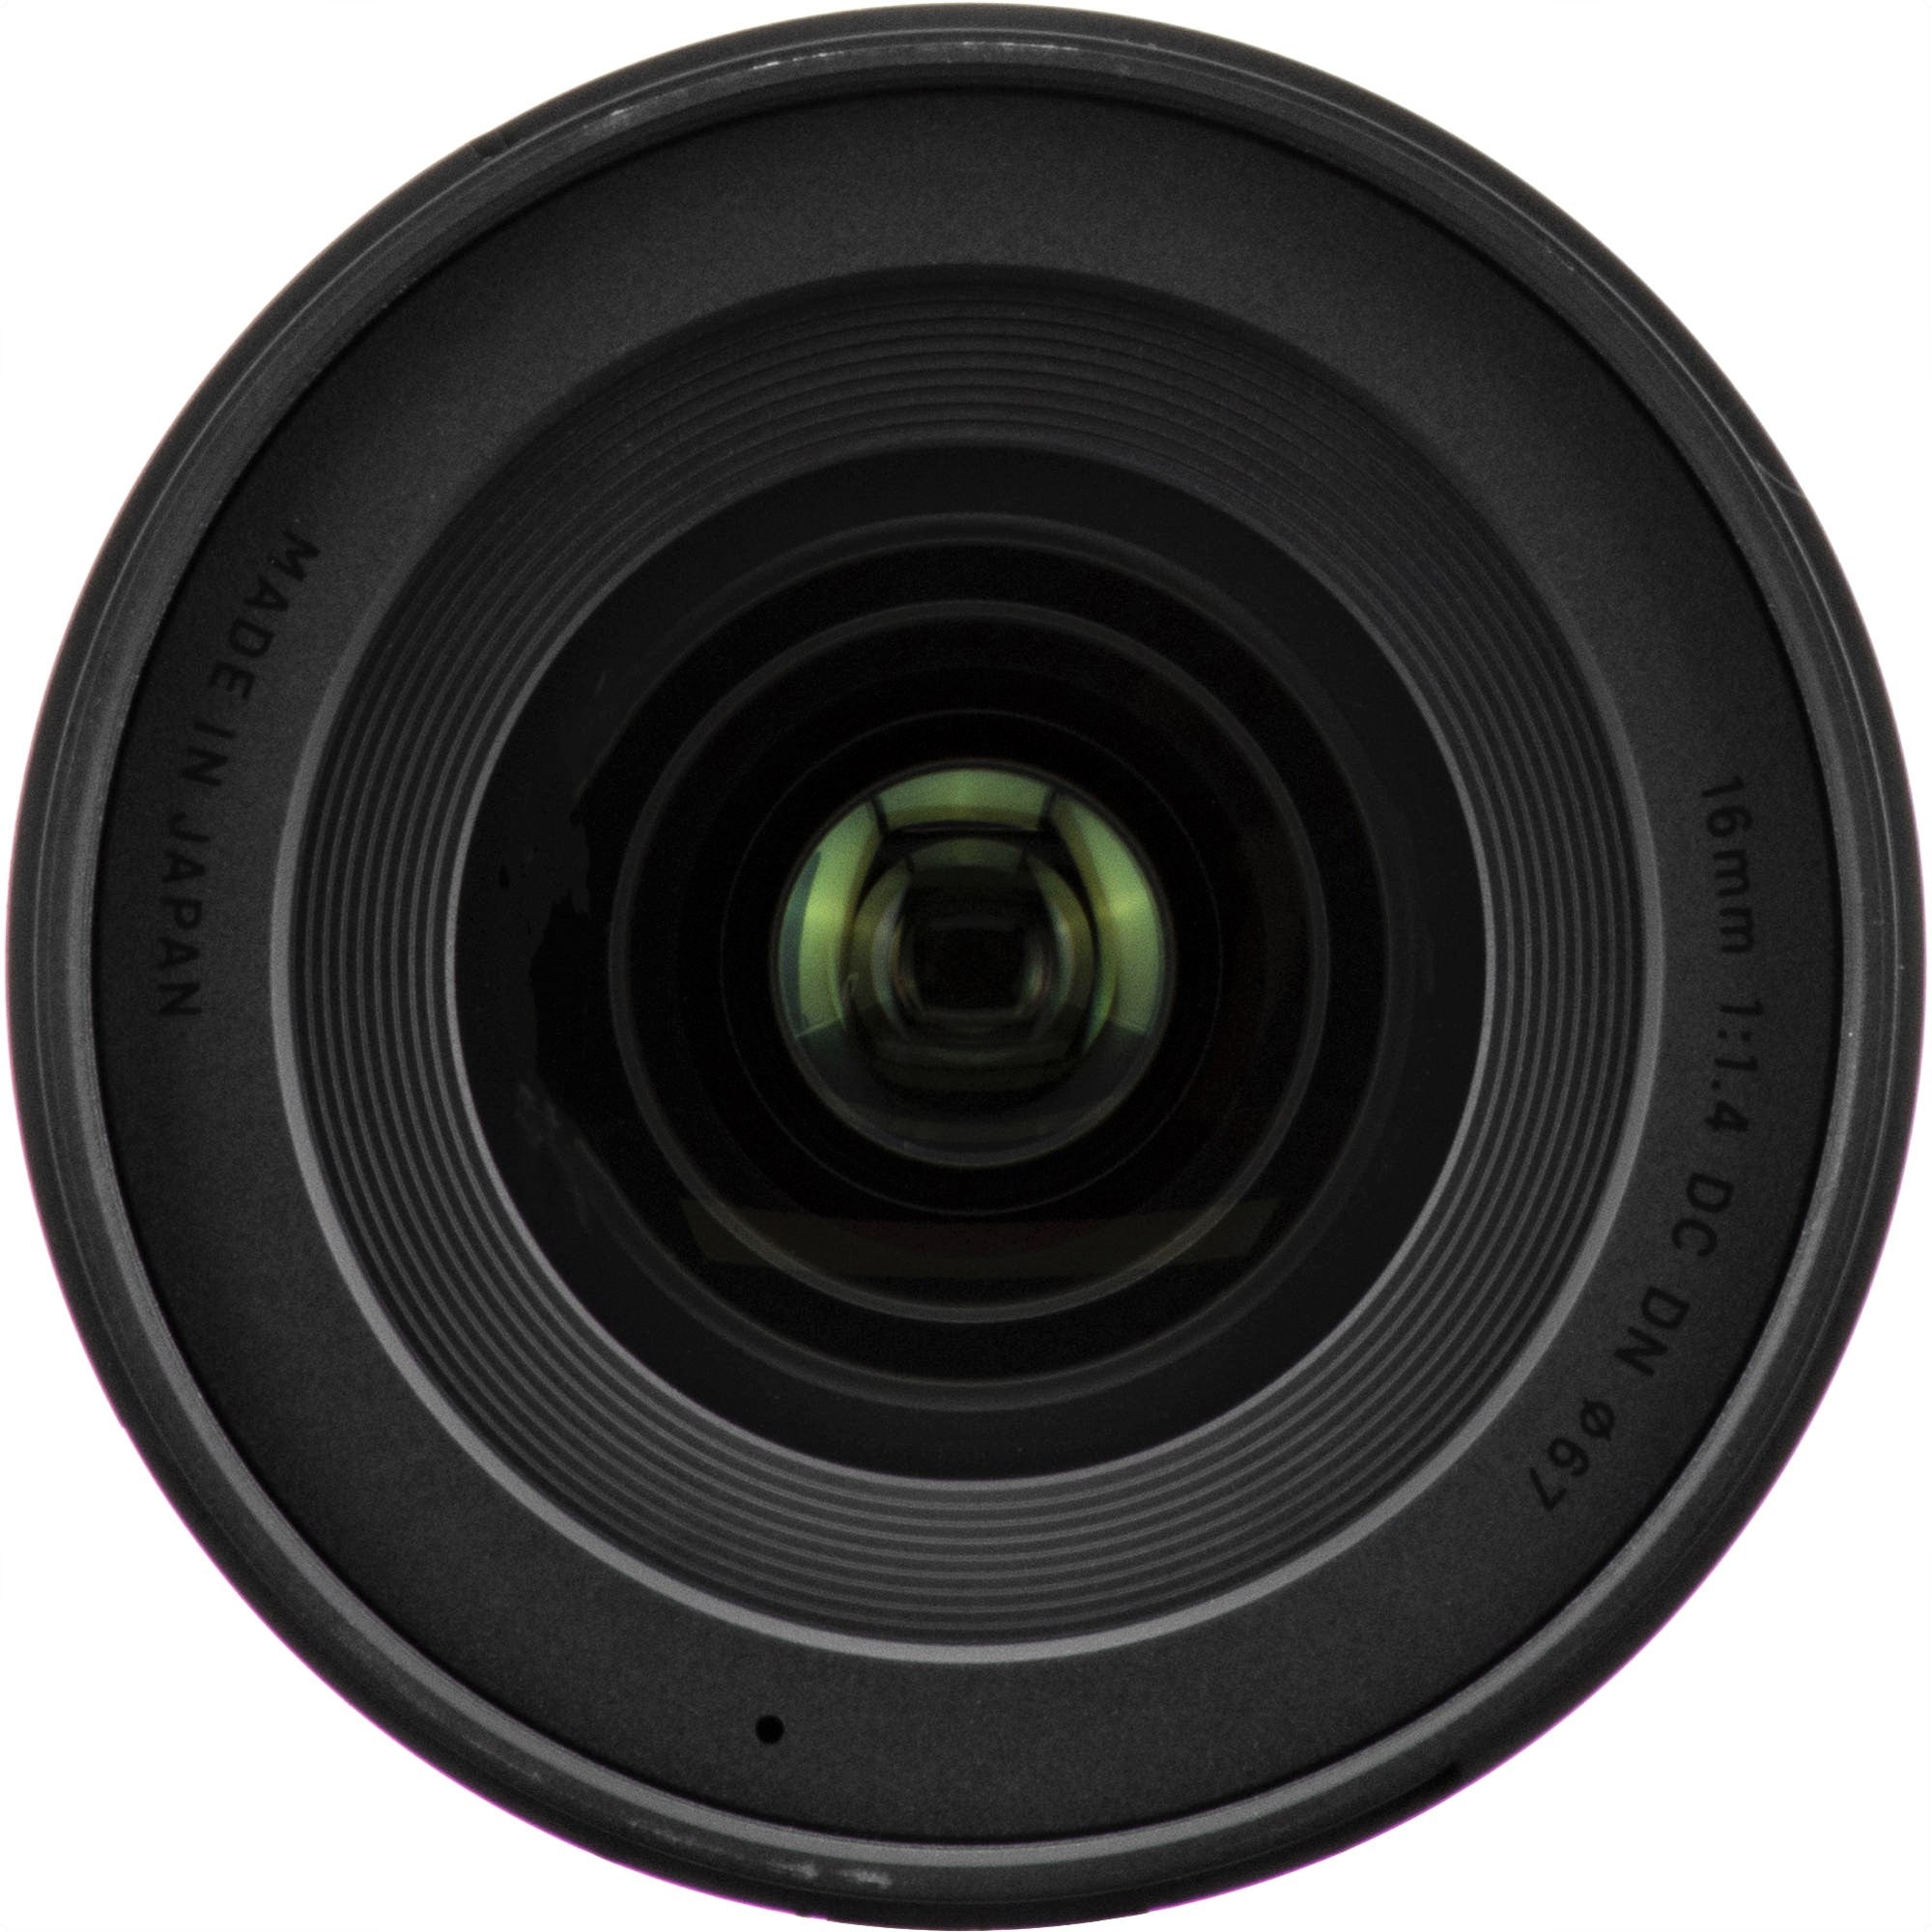 Sigma 16mm f/1.4 DC DN Contemporary Lens (MFT) - Front View